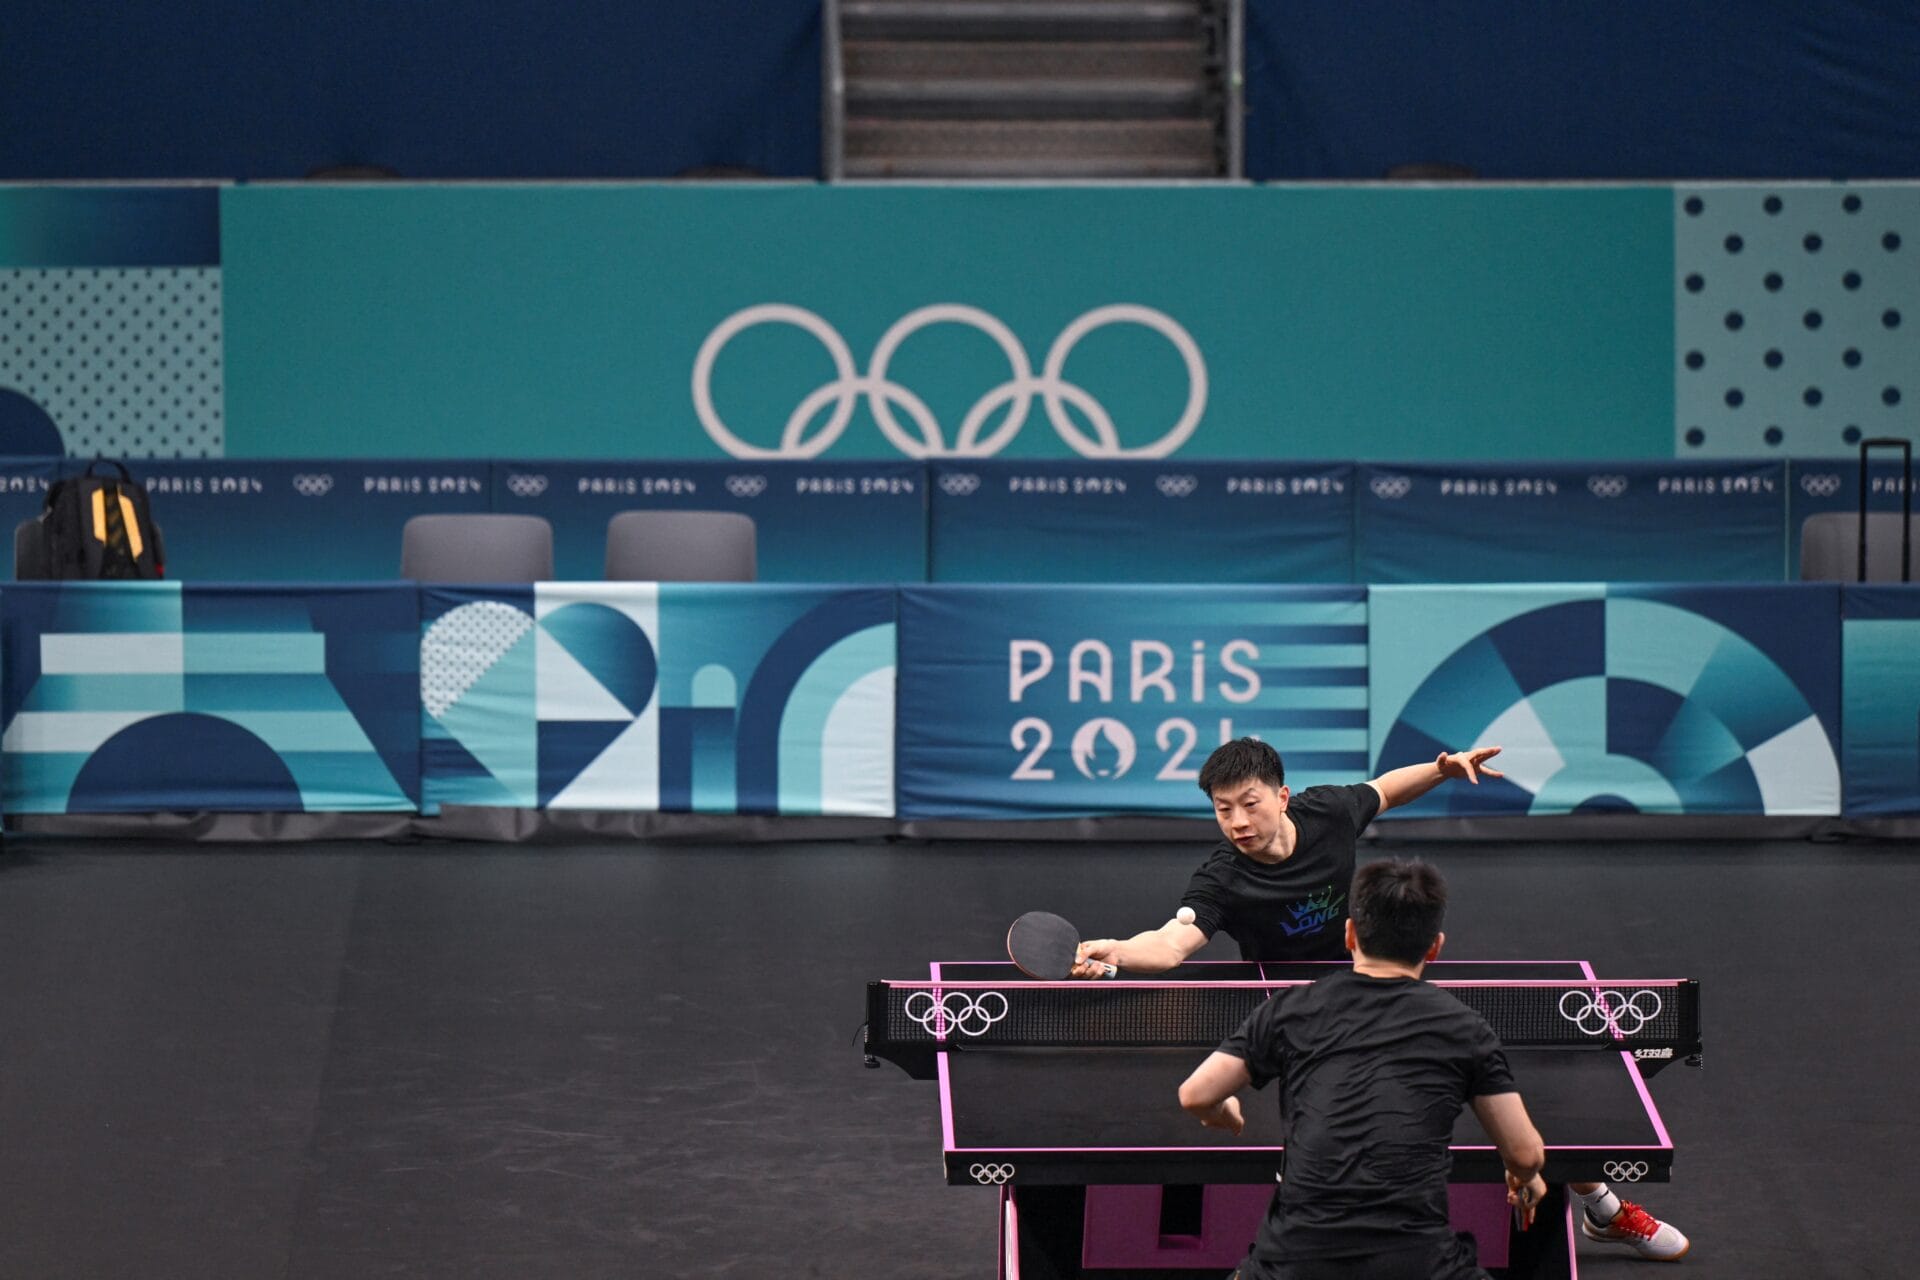 China's table tennis player Ma Long (back) practices during a training session at South Arena in Paris on July 23, 2024, ahead of the Paris 2024 Olympic Games. (Photo by WANG Zhao / AFP) (Photo by WANG ZHAO/AFP via Getty Images)